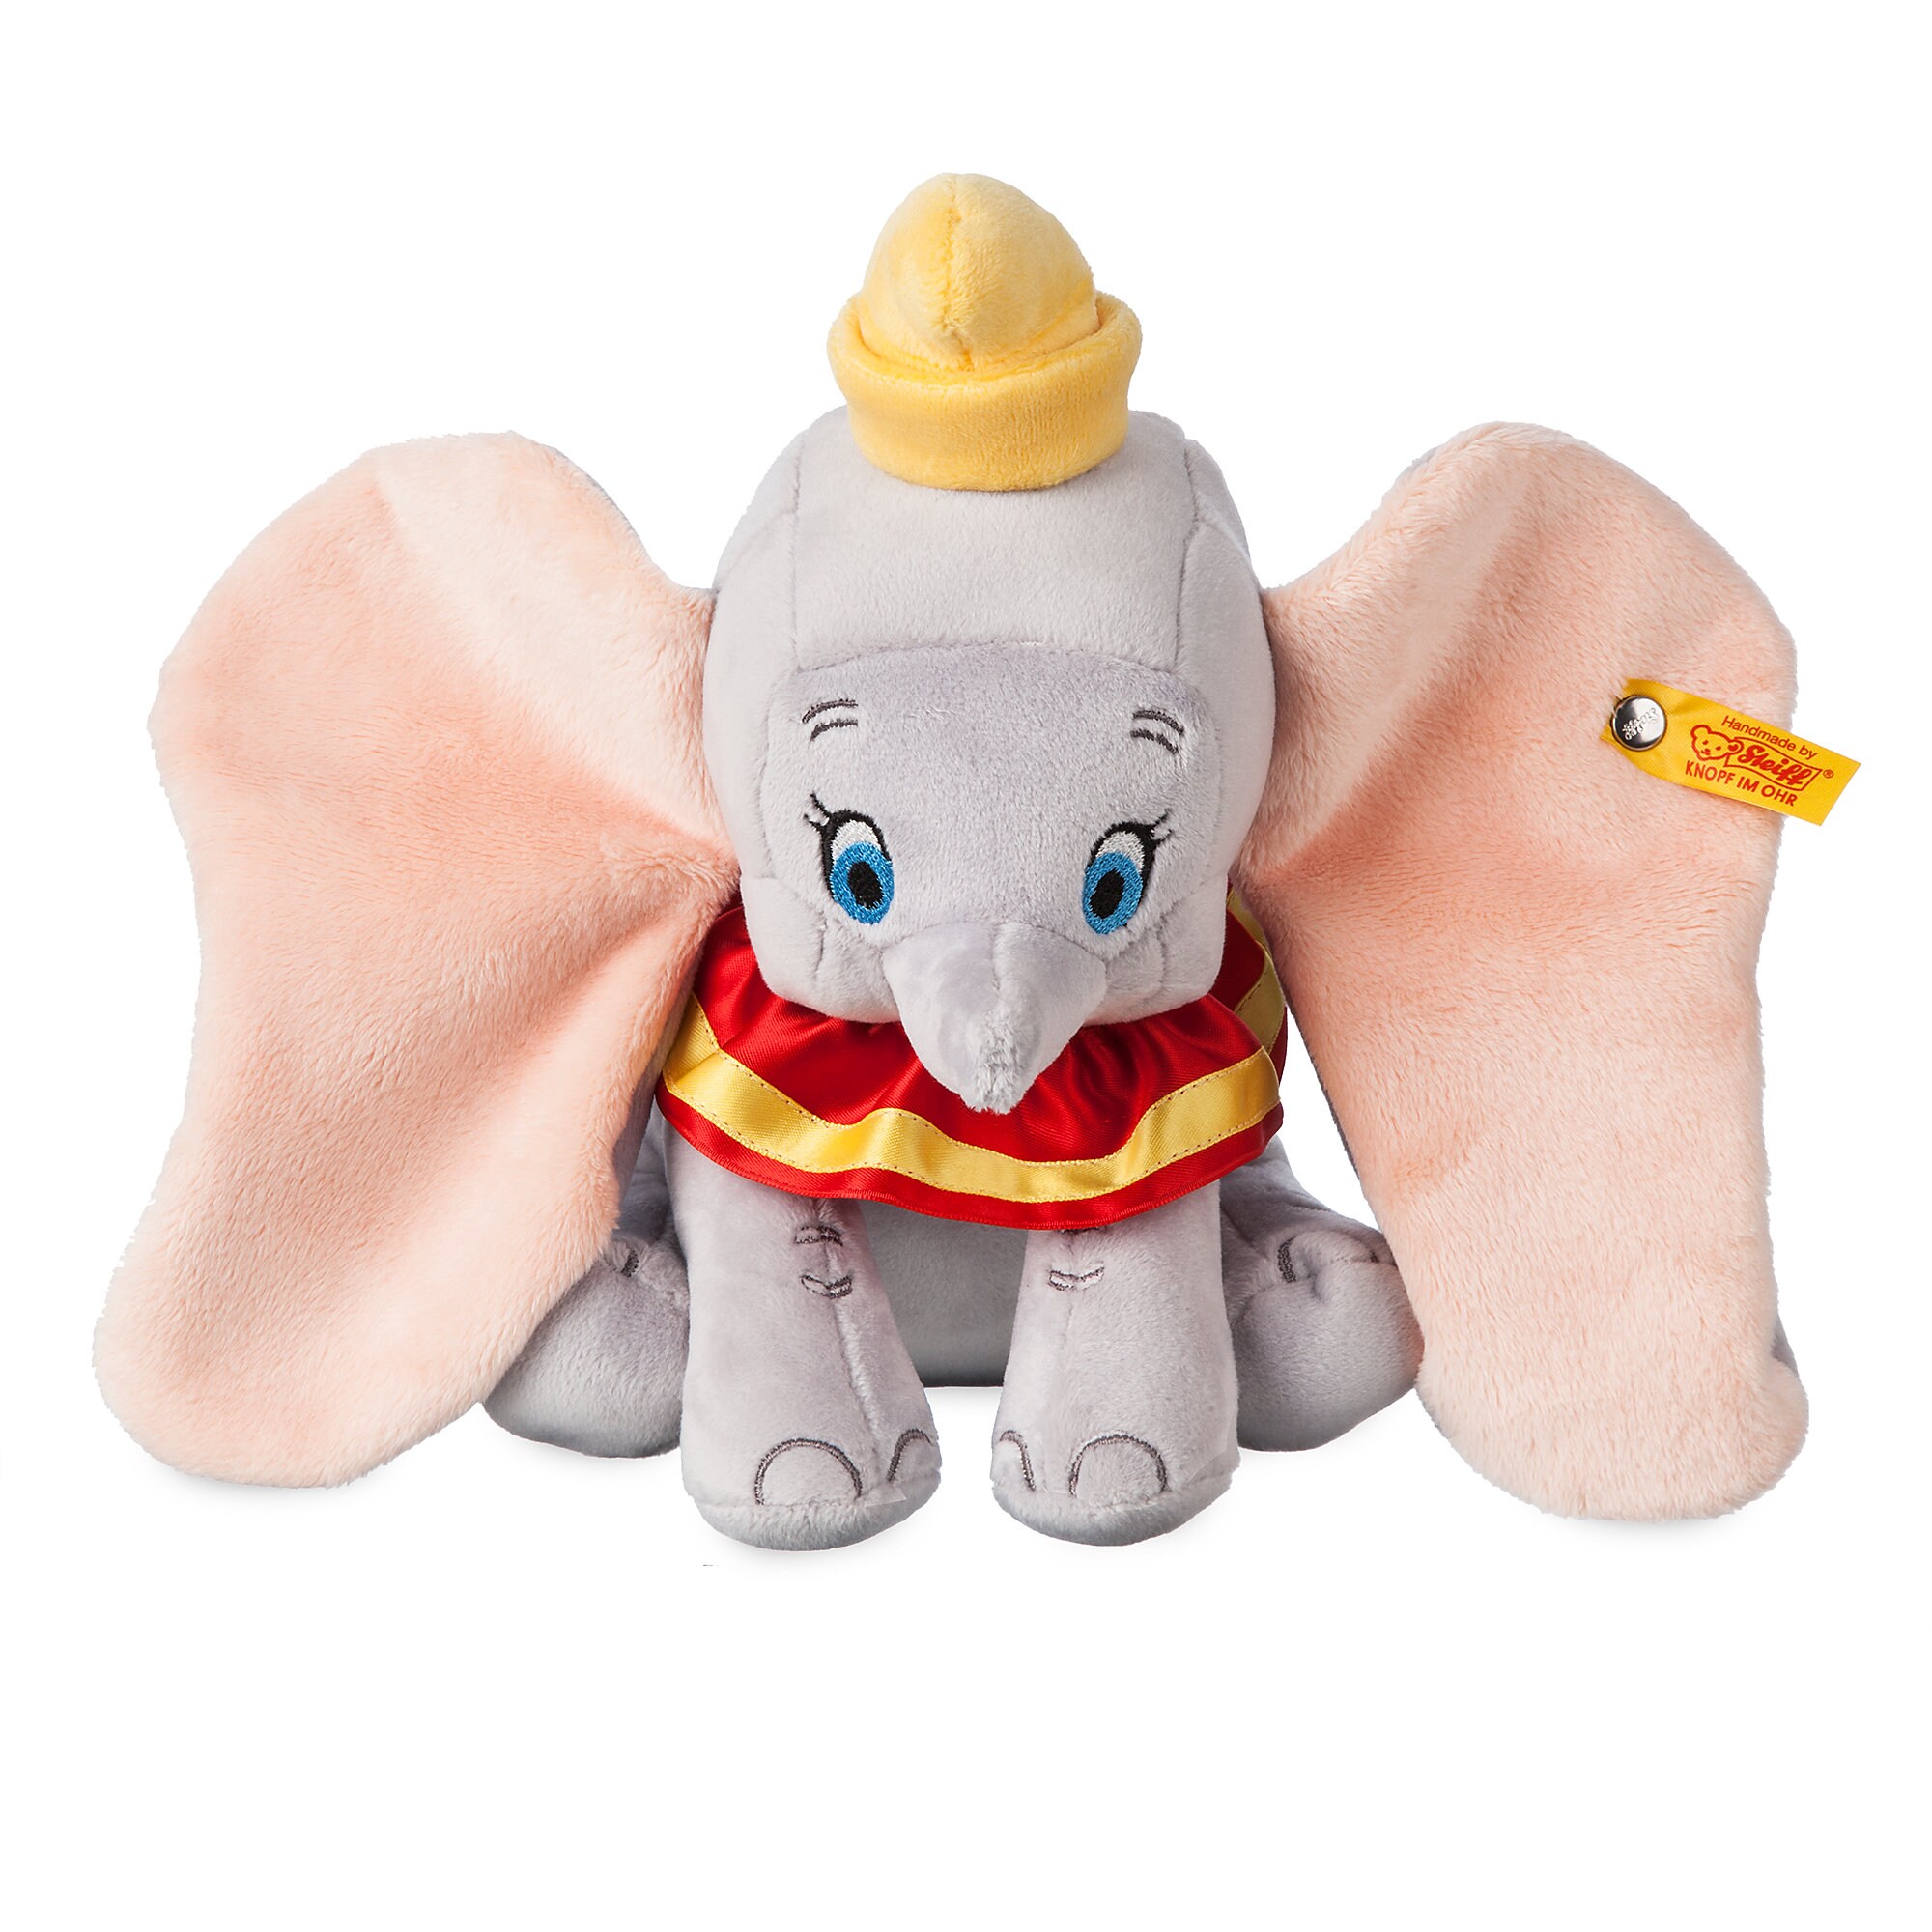 Dumbo Collectible Plush by Steiff - 9'' - Limited Release